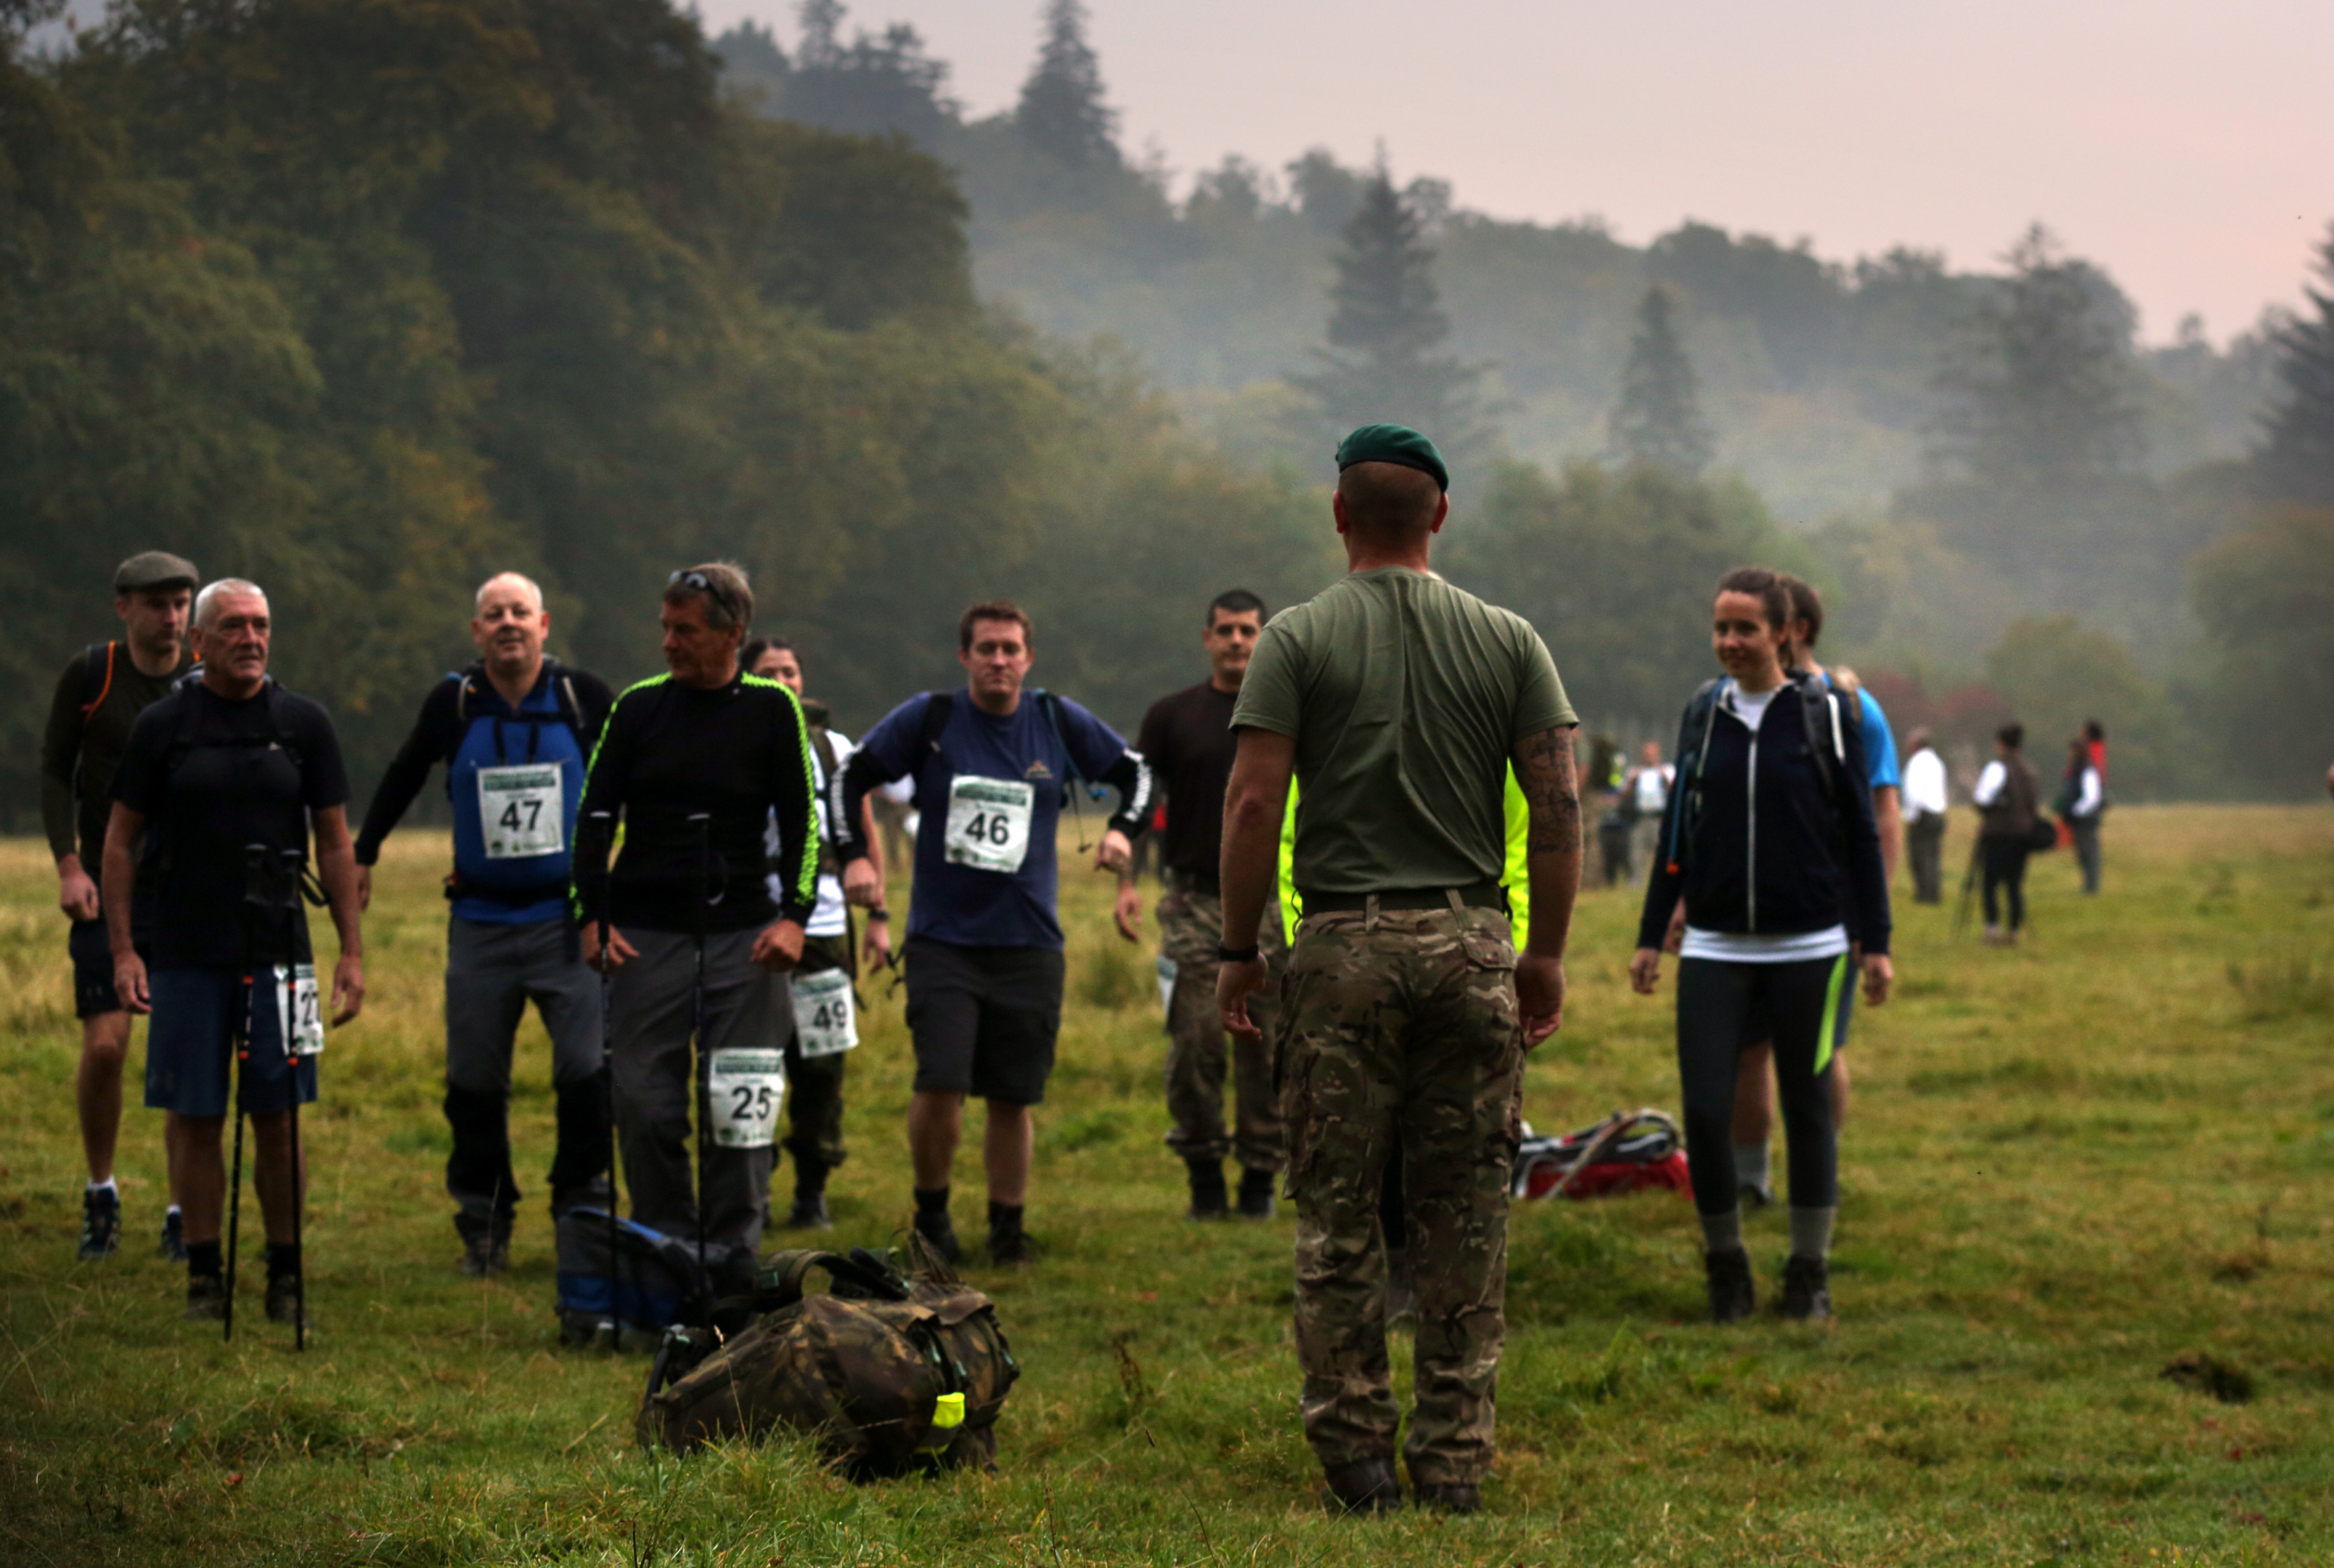 Survive The Yomp participants are put through their paces